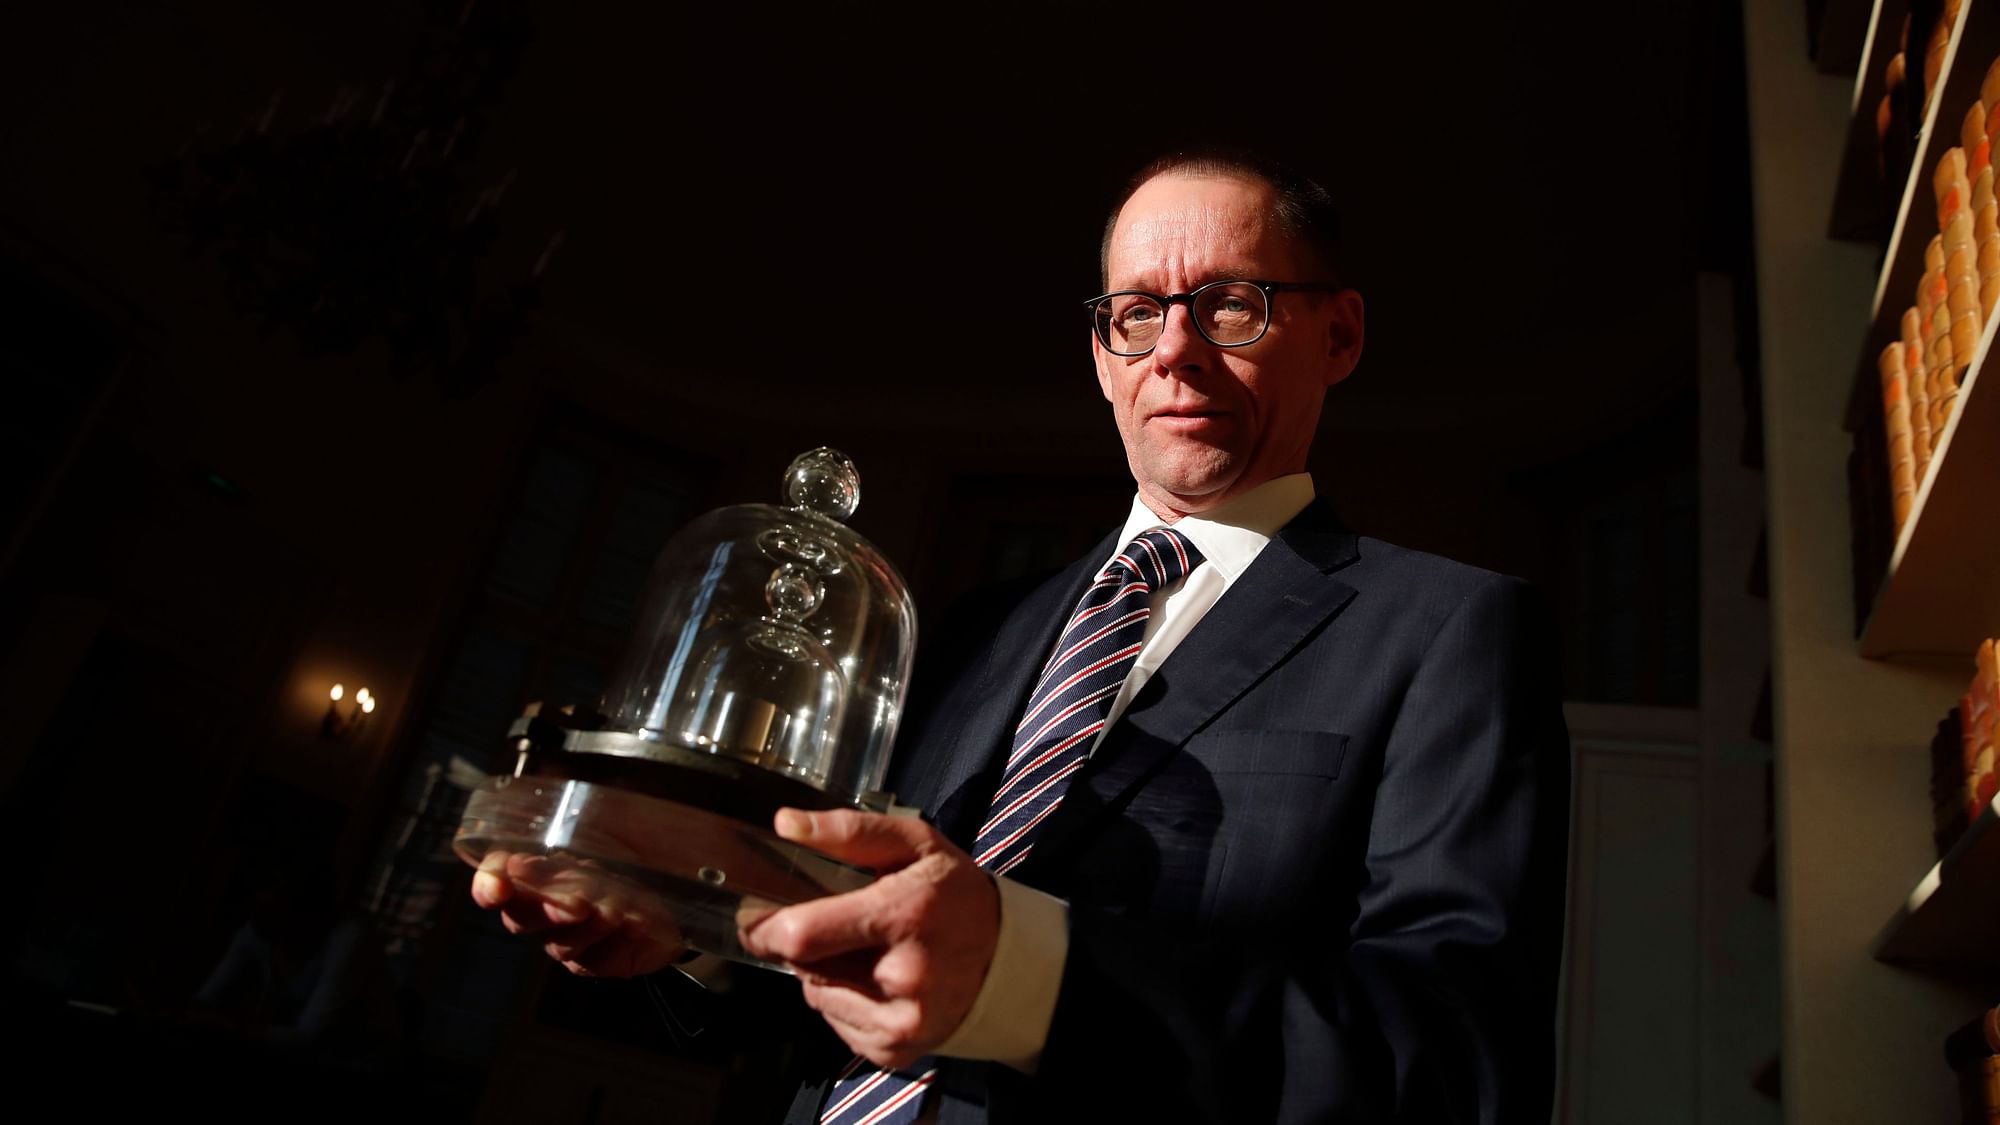 The head of BIPM (International Bureau of Weights and Measures) Martin JT Milton holds a replica of the International Prototype Kilogram in Sevres, near Paris.